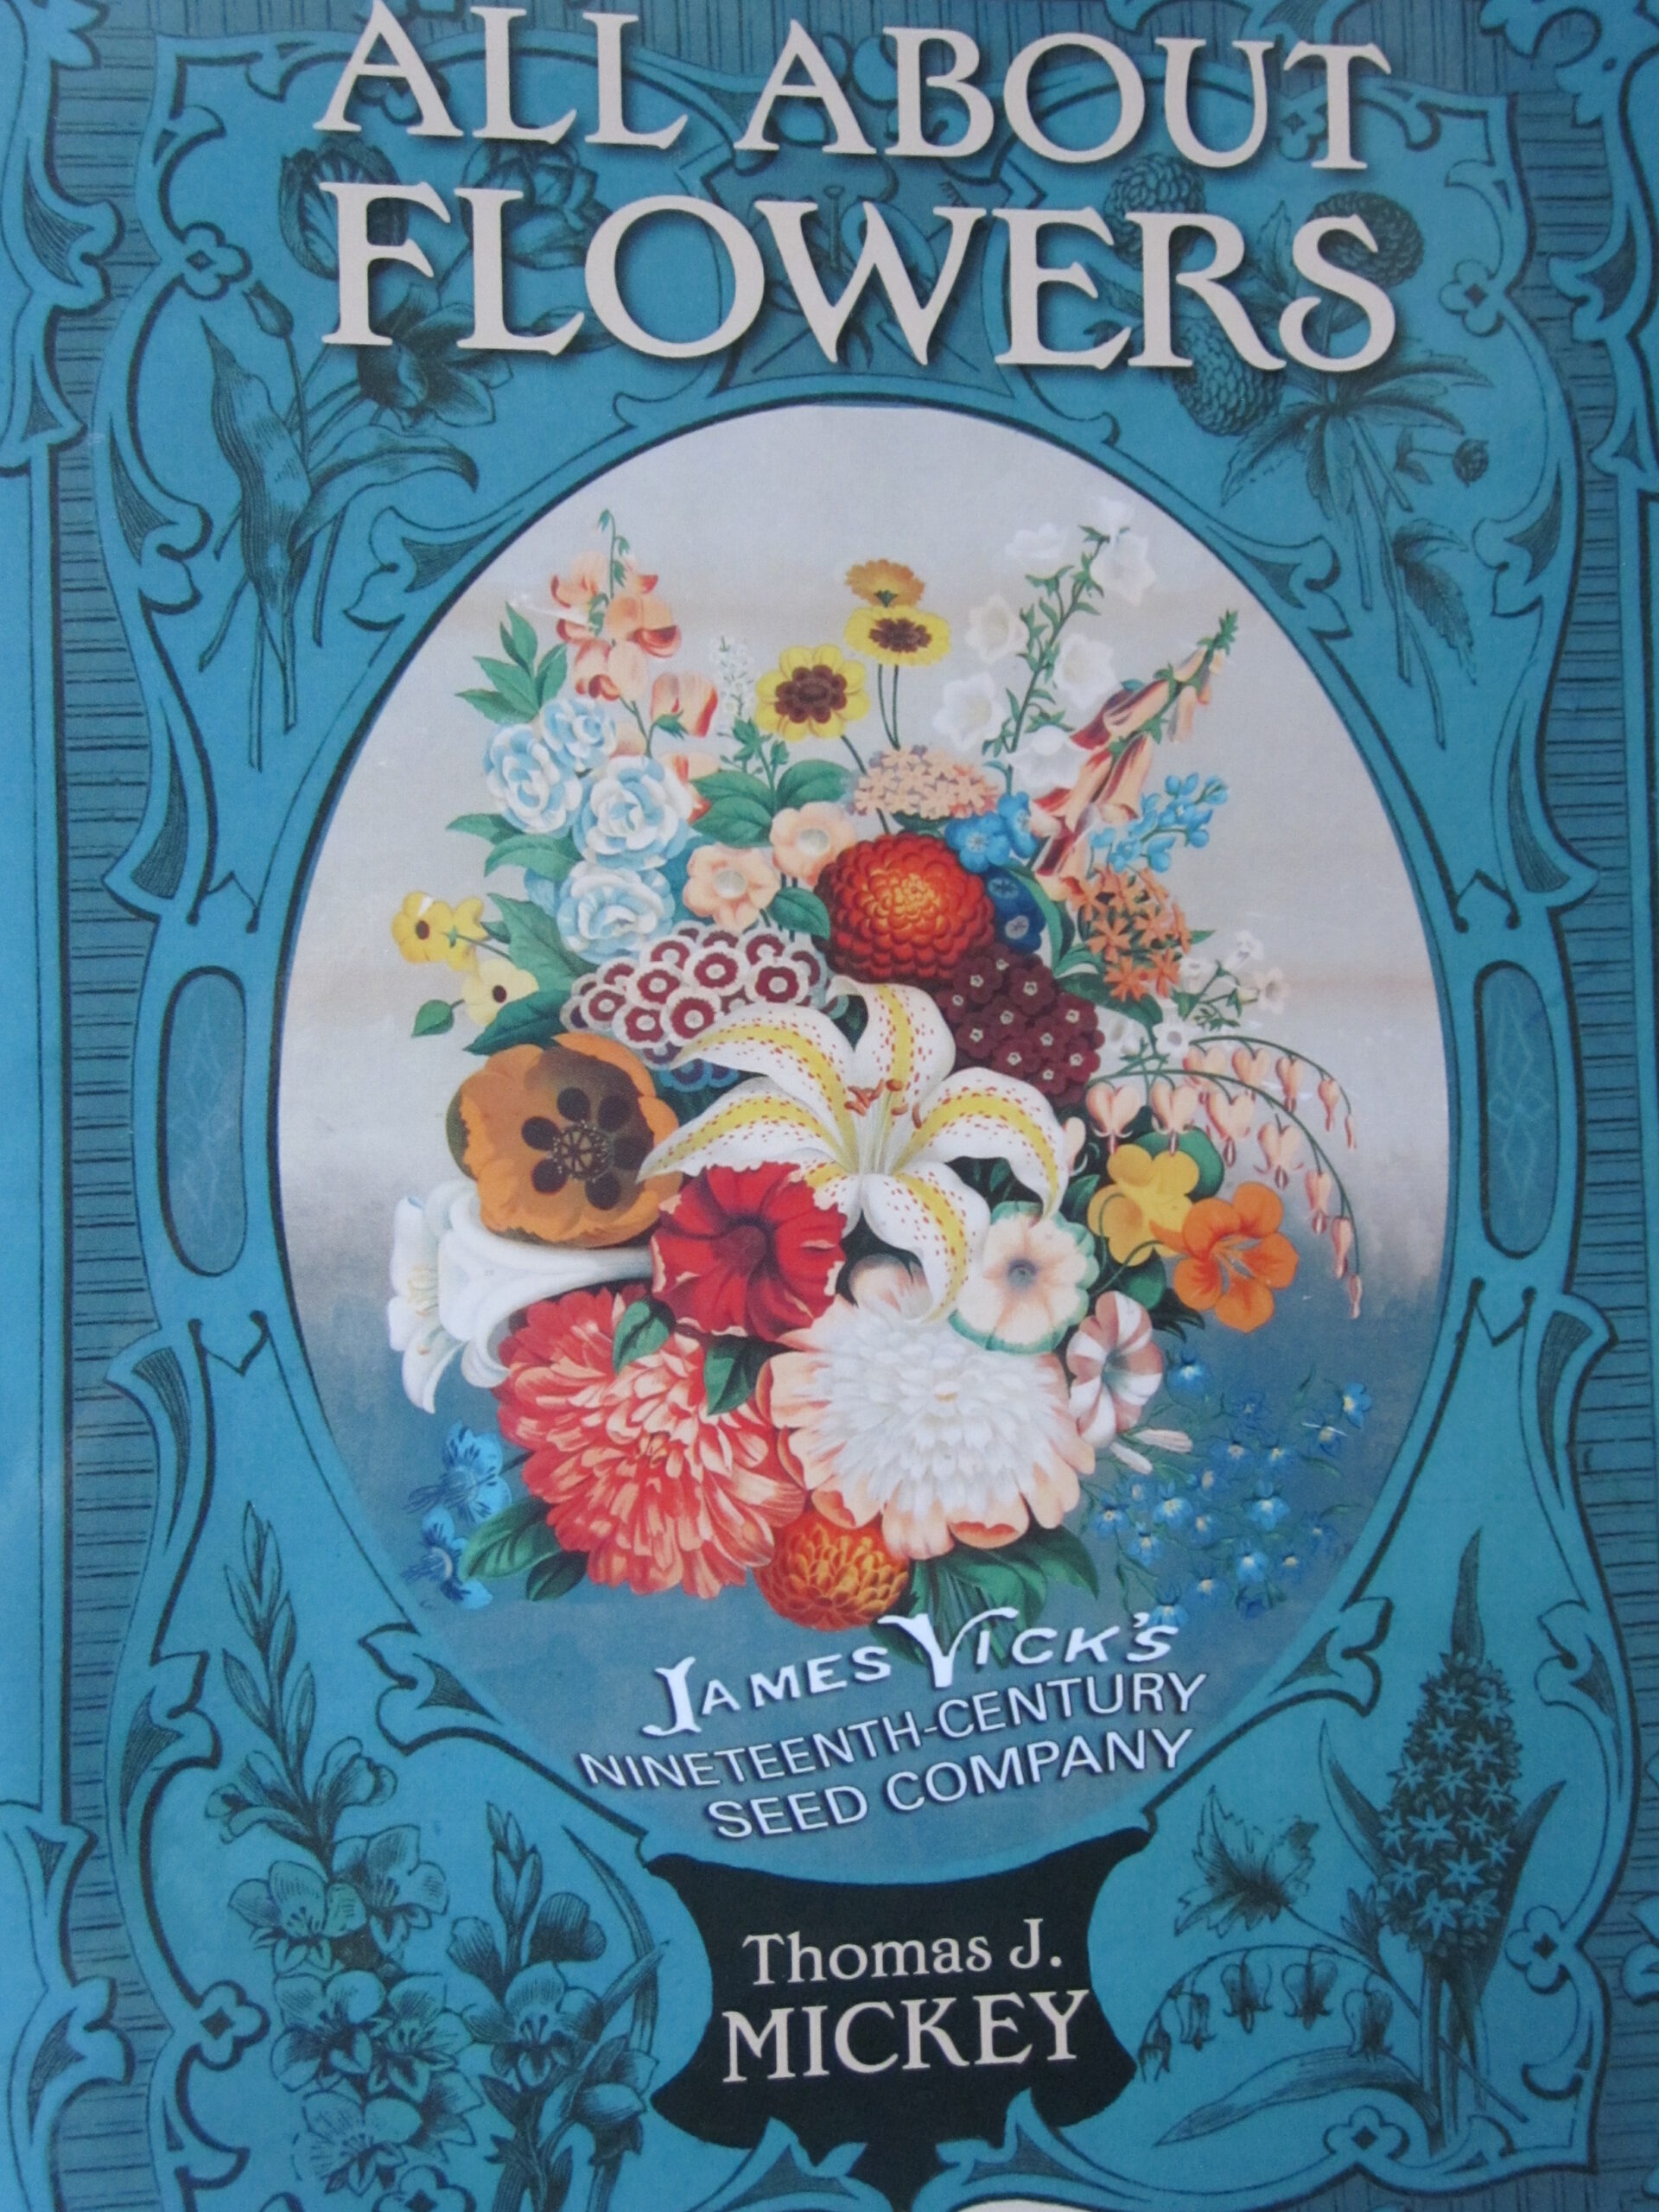 Pictured is the cover of Thomas J. Mickey's new book, "All About Flowers." (Photo (c) Hilda M. Morrill)